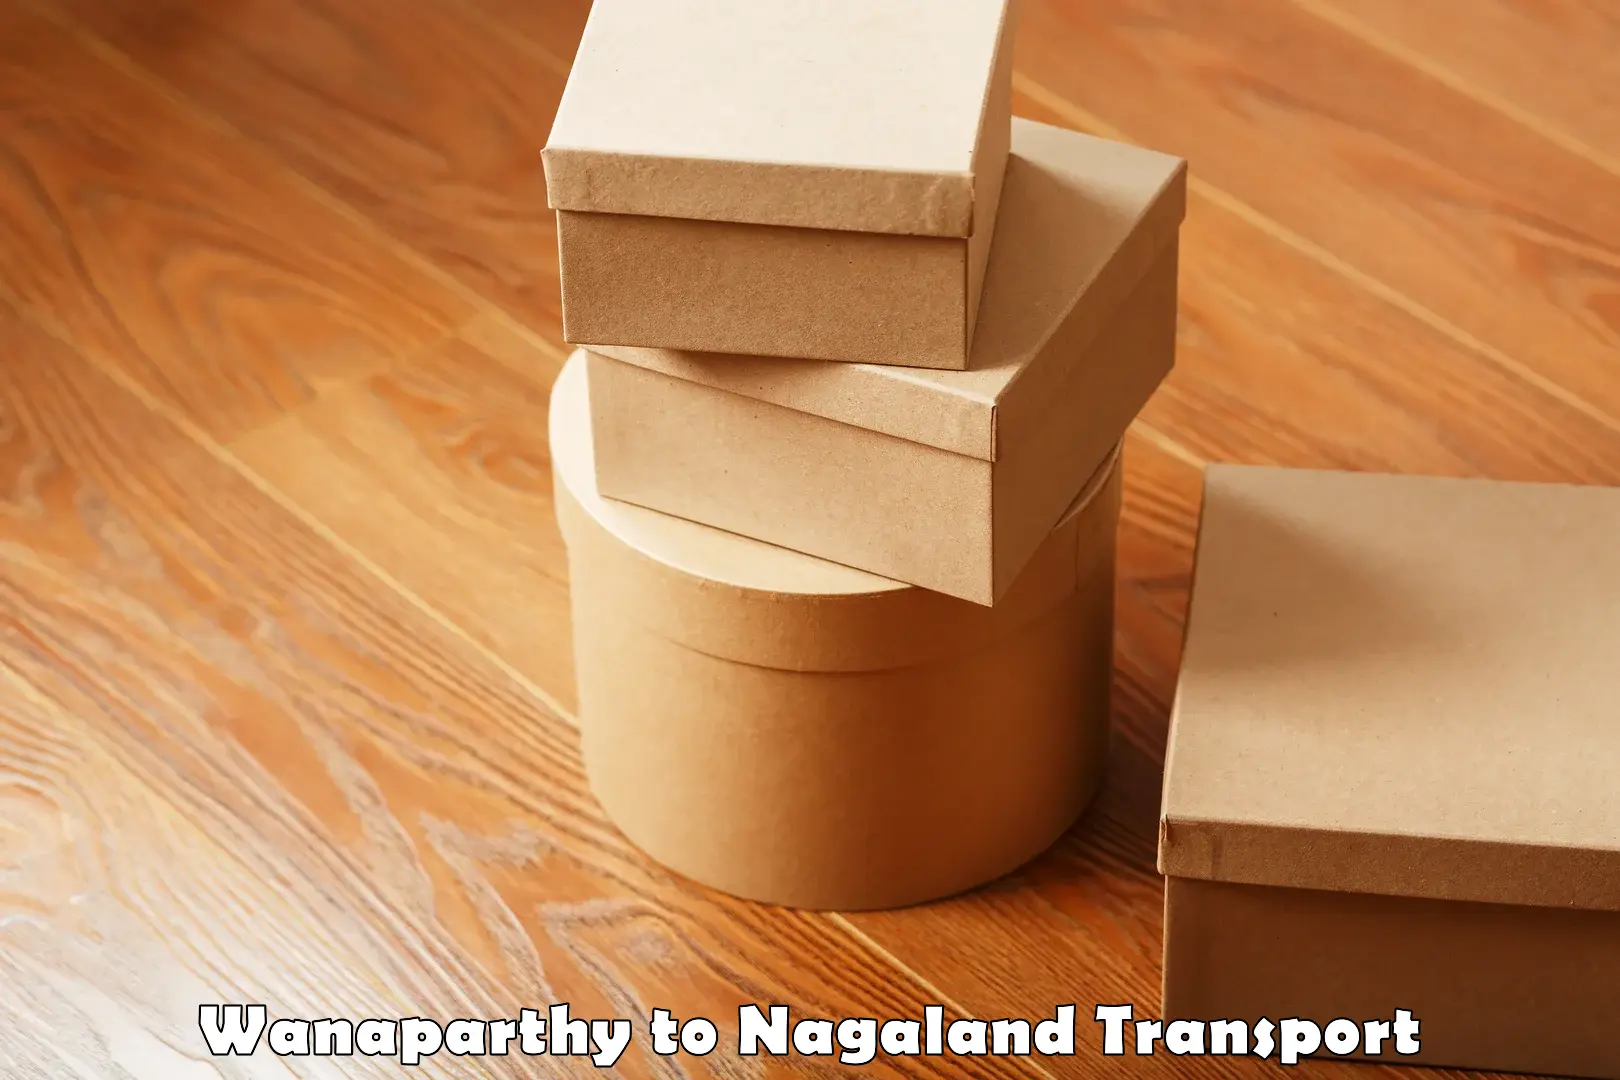 Truck transport companies in India Wanaparthy to Nagaland